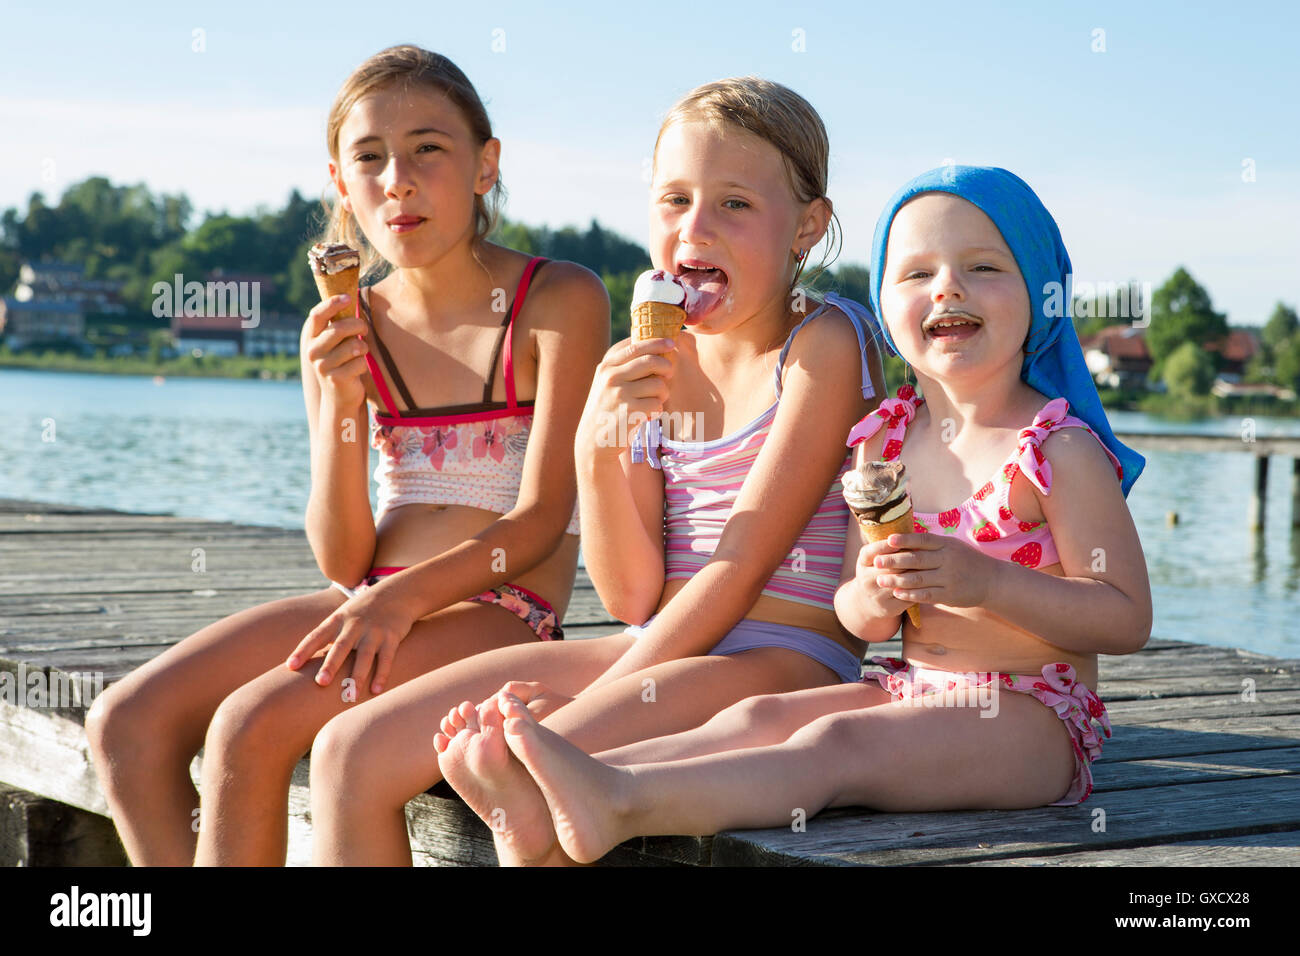 Two sisters and female toddler on pier eating ice cream cones, Lake Seeoner See, Bavaria, Germany Stock Photo